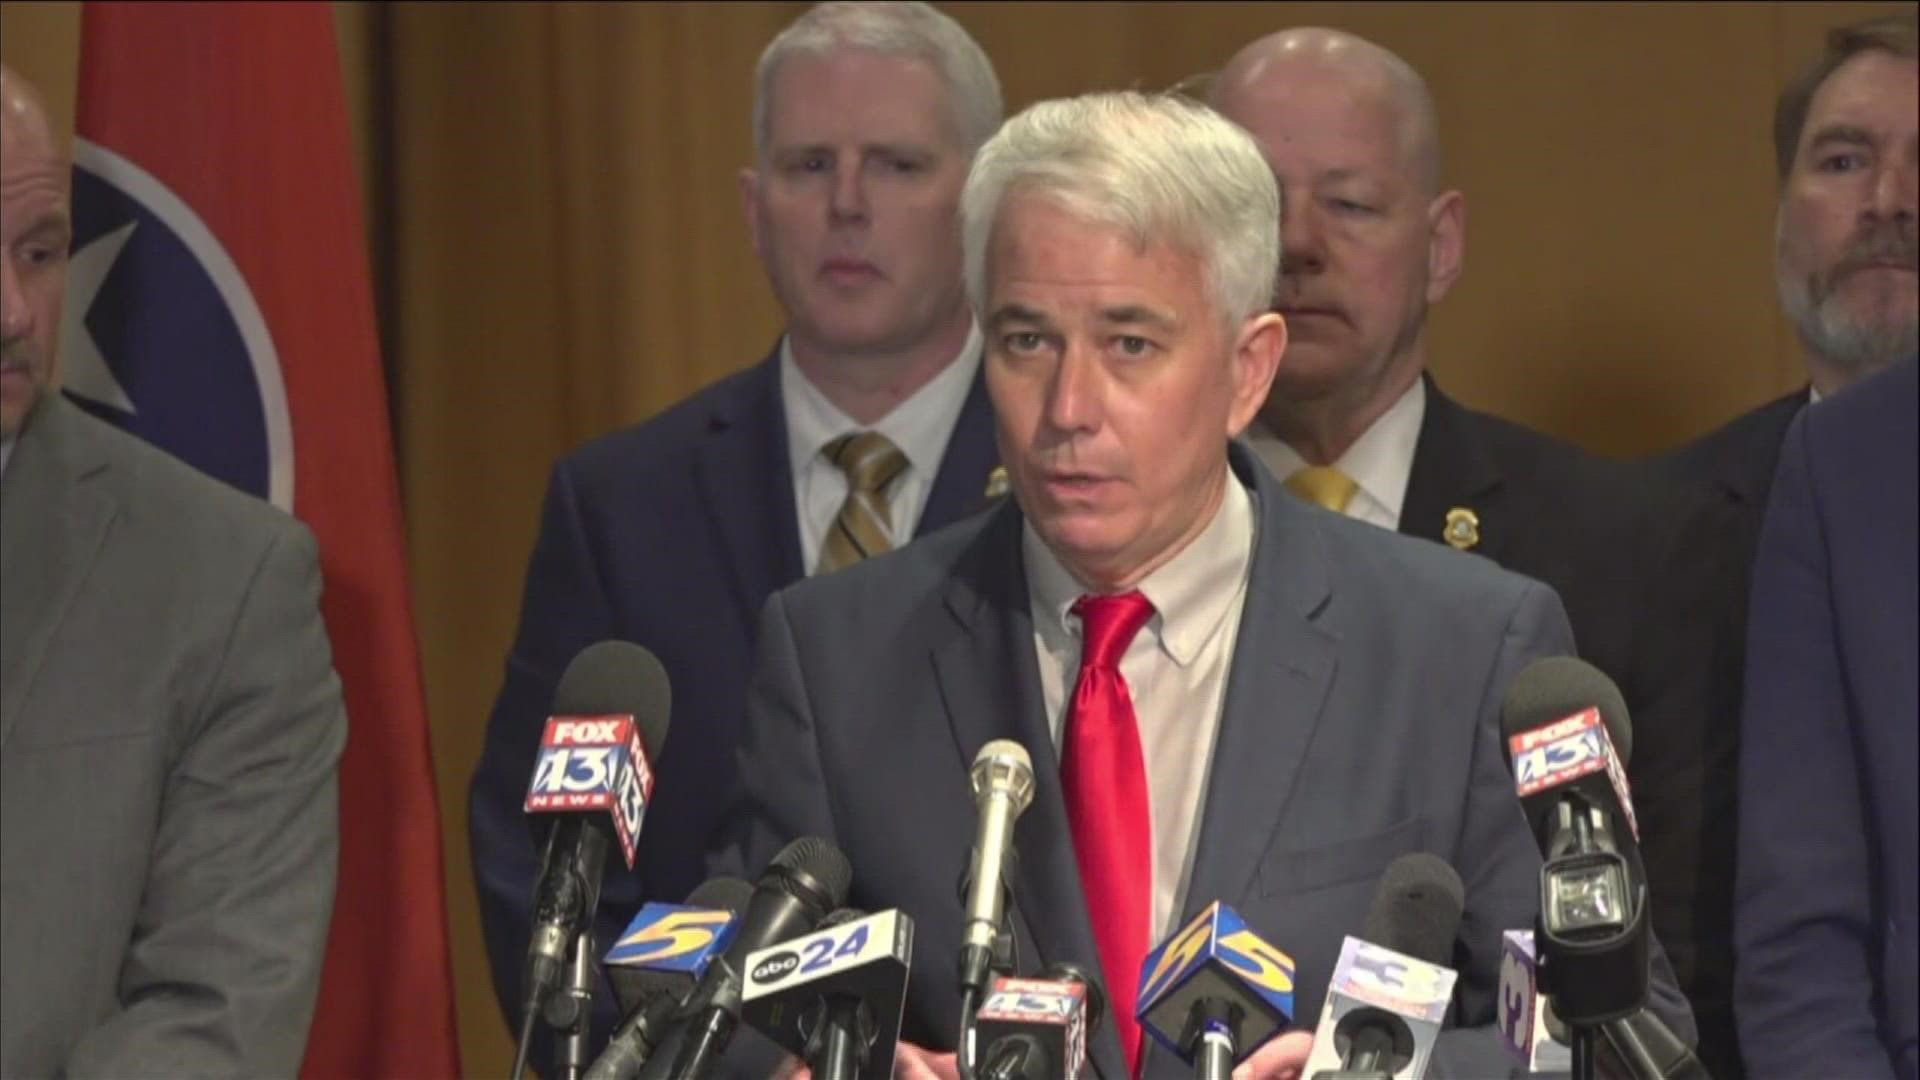 Shelby County District Attorney Steve Mulroy and TBI Director David Rausch spoke to the media after charges were filed against five Memphis Police officers.